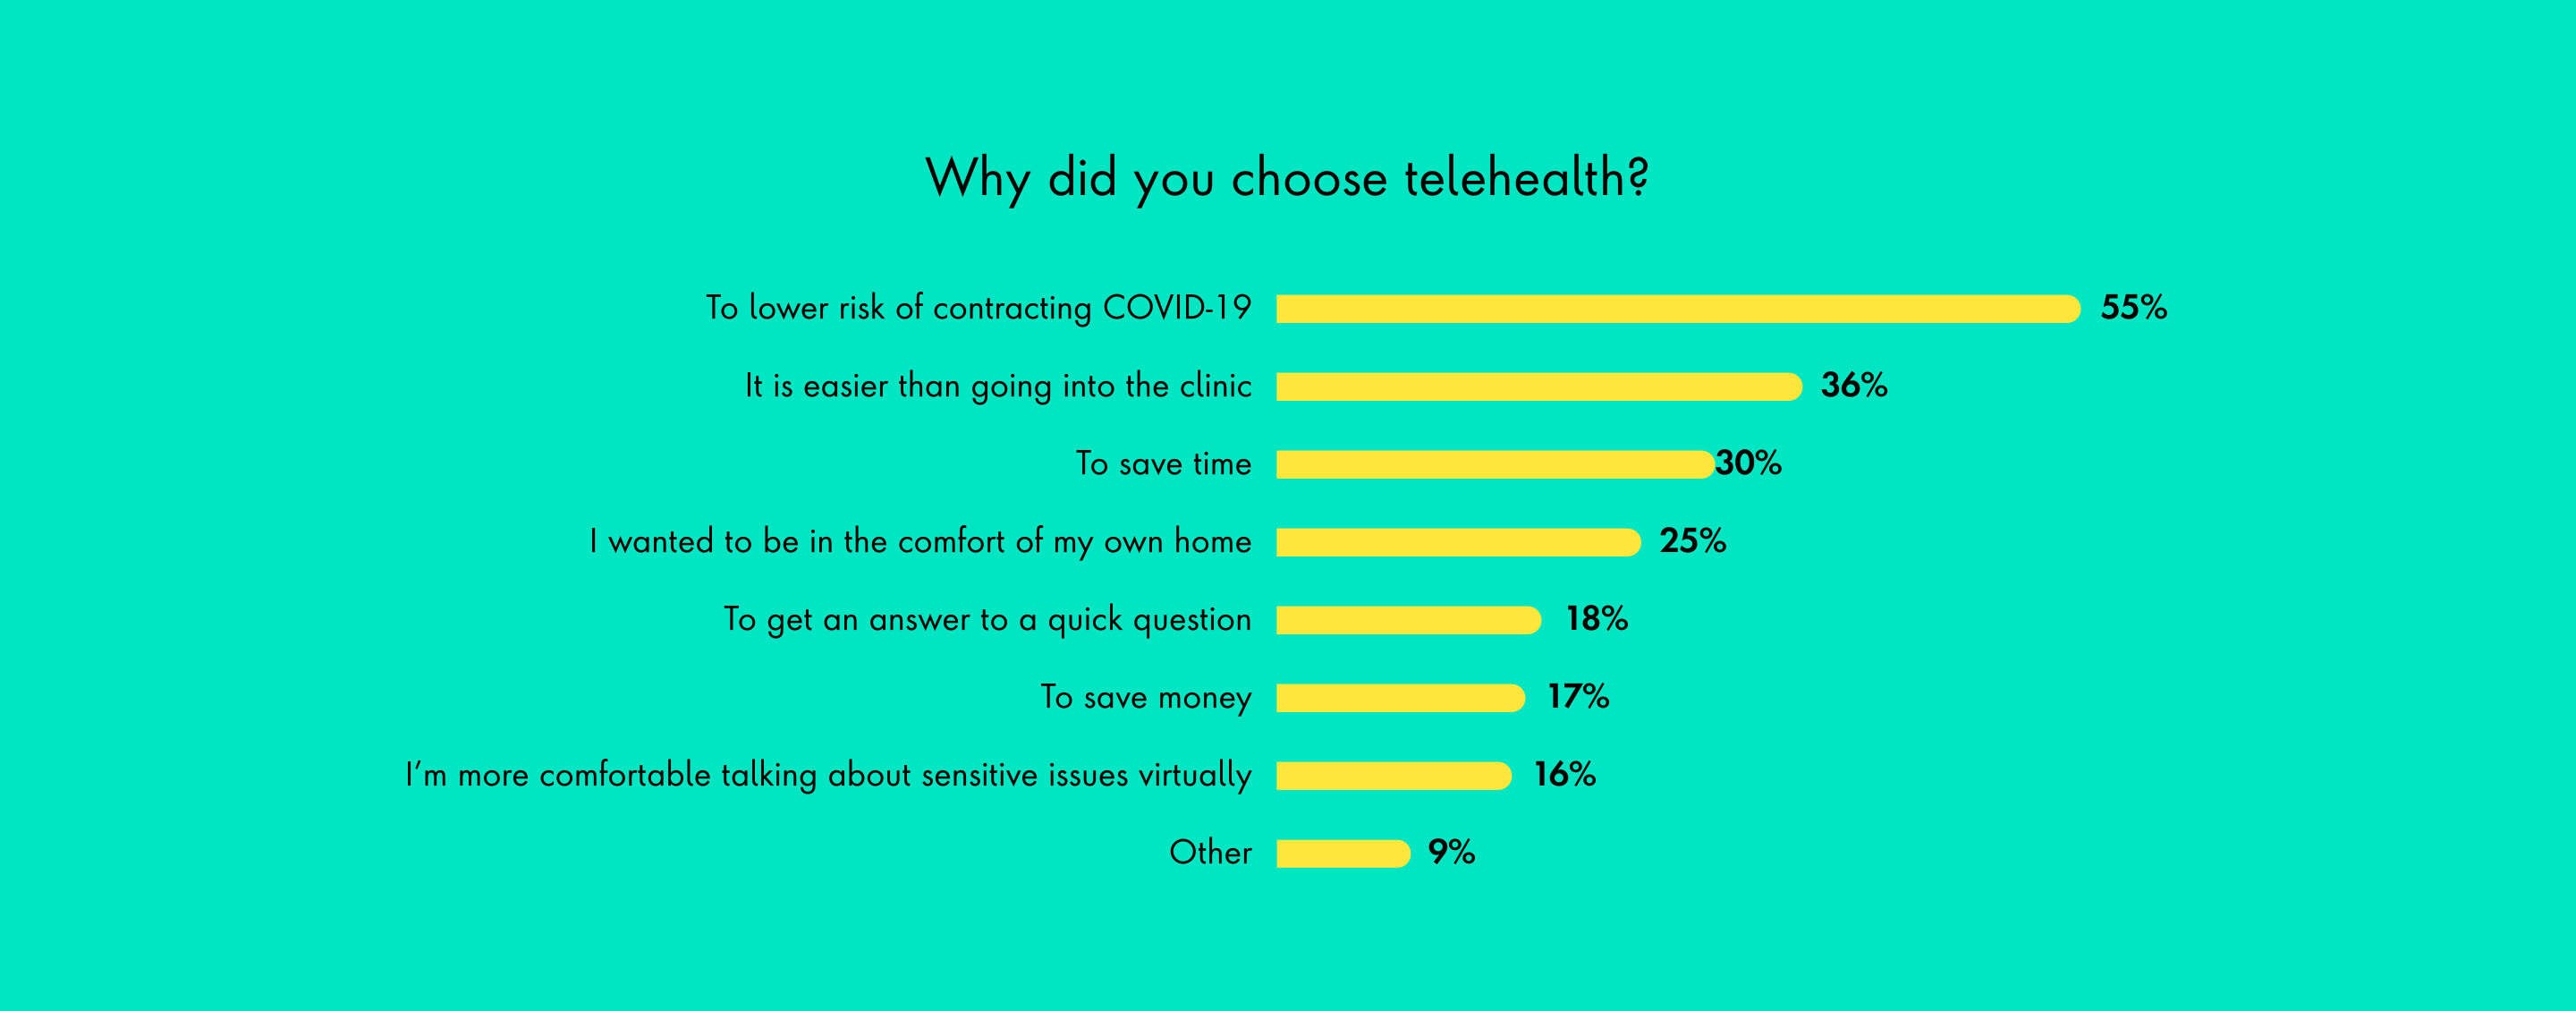 Why did you choose telemedicine chart shows the top reasons are 1.To lower the risk of contracting COVID-19 2.It is easier than going to the clinic 3.To save time 